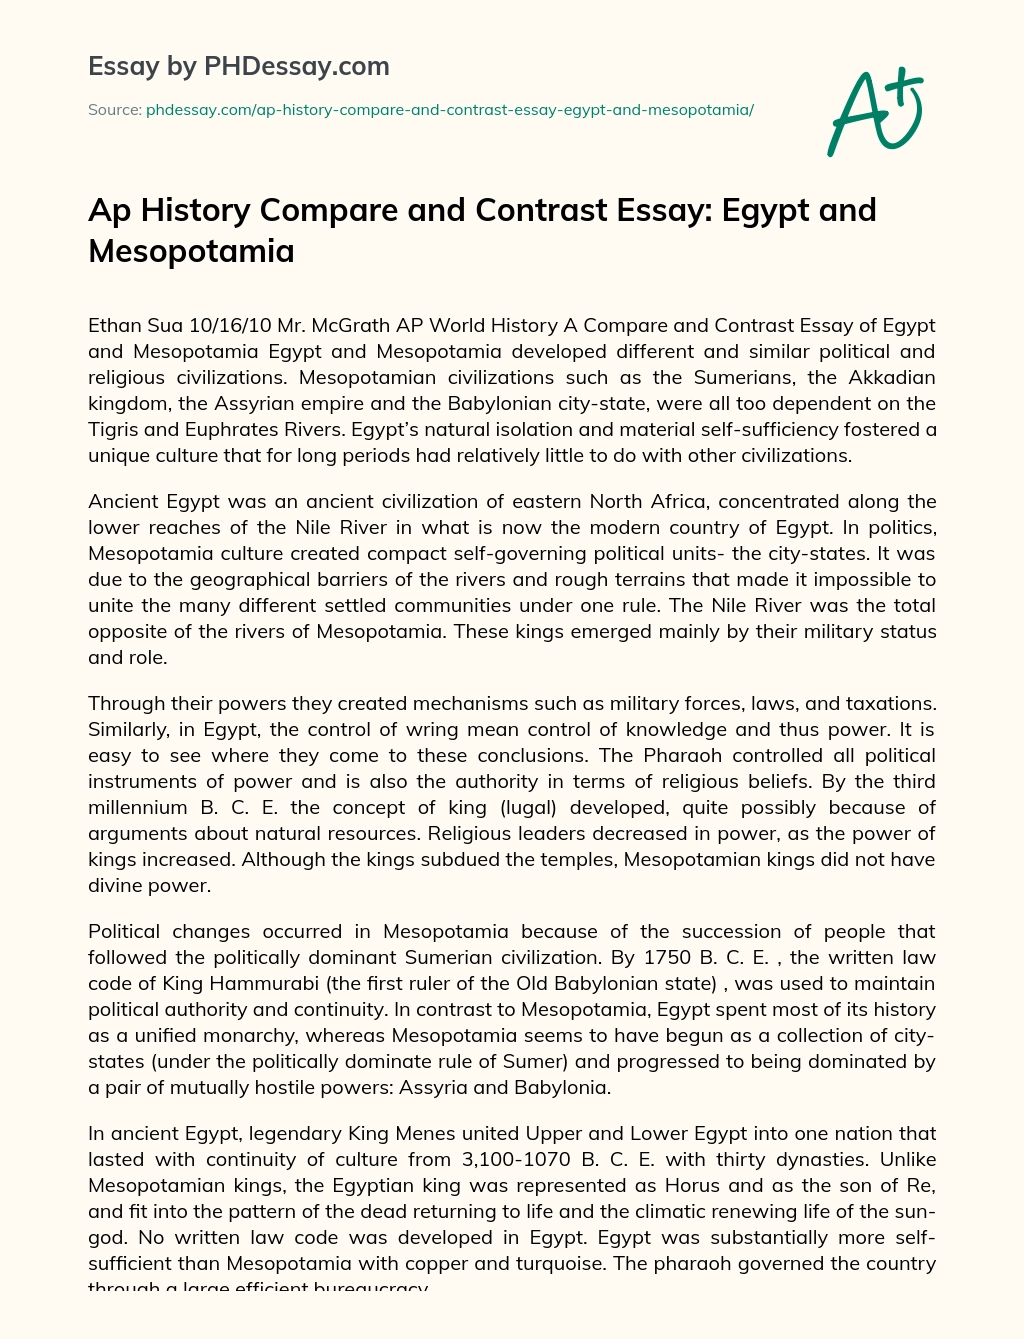 Ap History Compare and Contrast Essay: Egypt and Mesopotamia essay